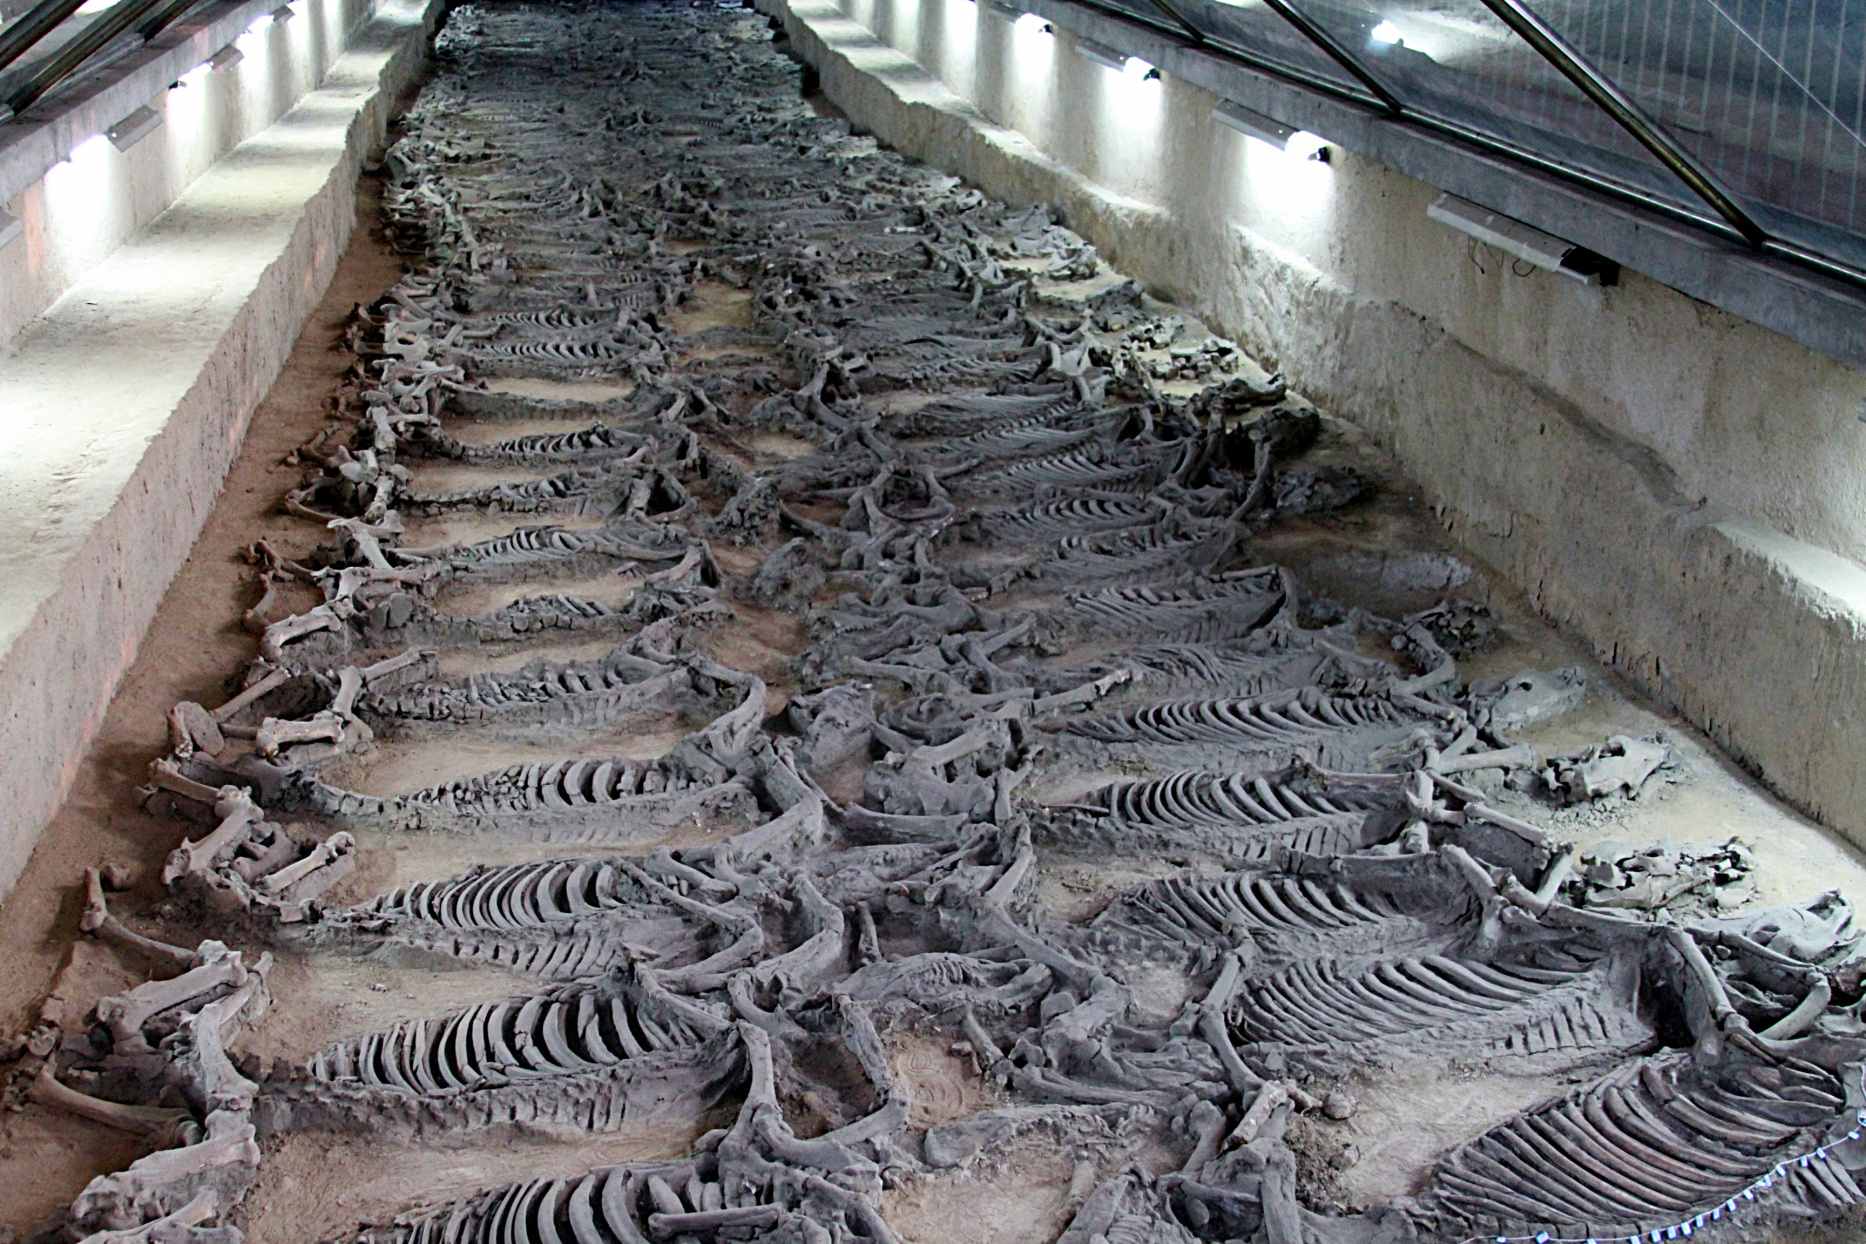 Photograph of horse skeletons in the "Sacrificial Horse Pit", a burial site from the times of the State of Qi, believed to belong to the tomb of Duke Jing of Qi who reigned from 547 to 490 BC.